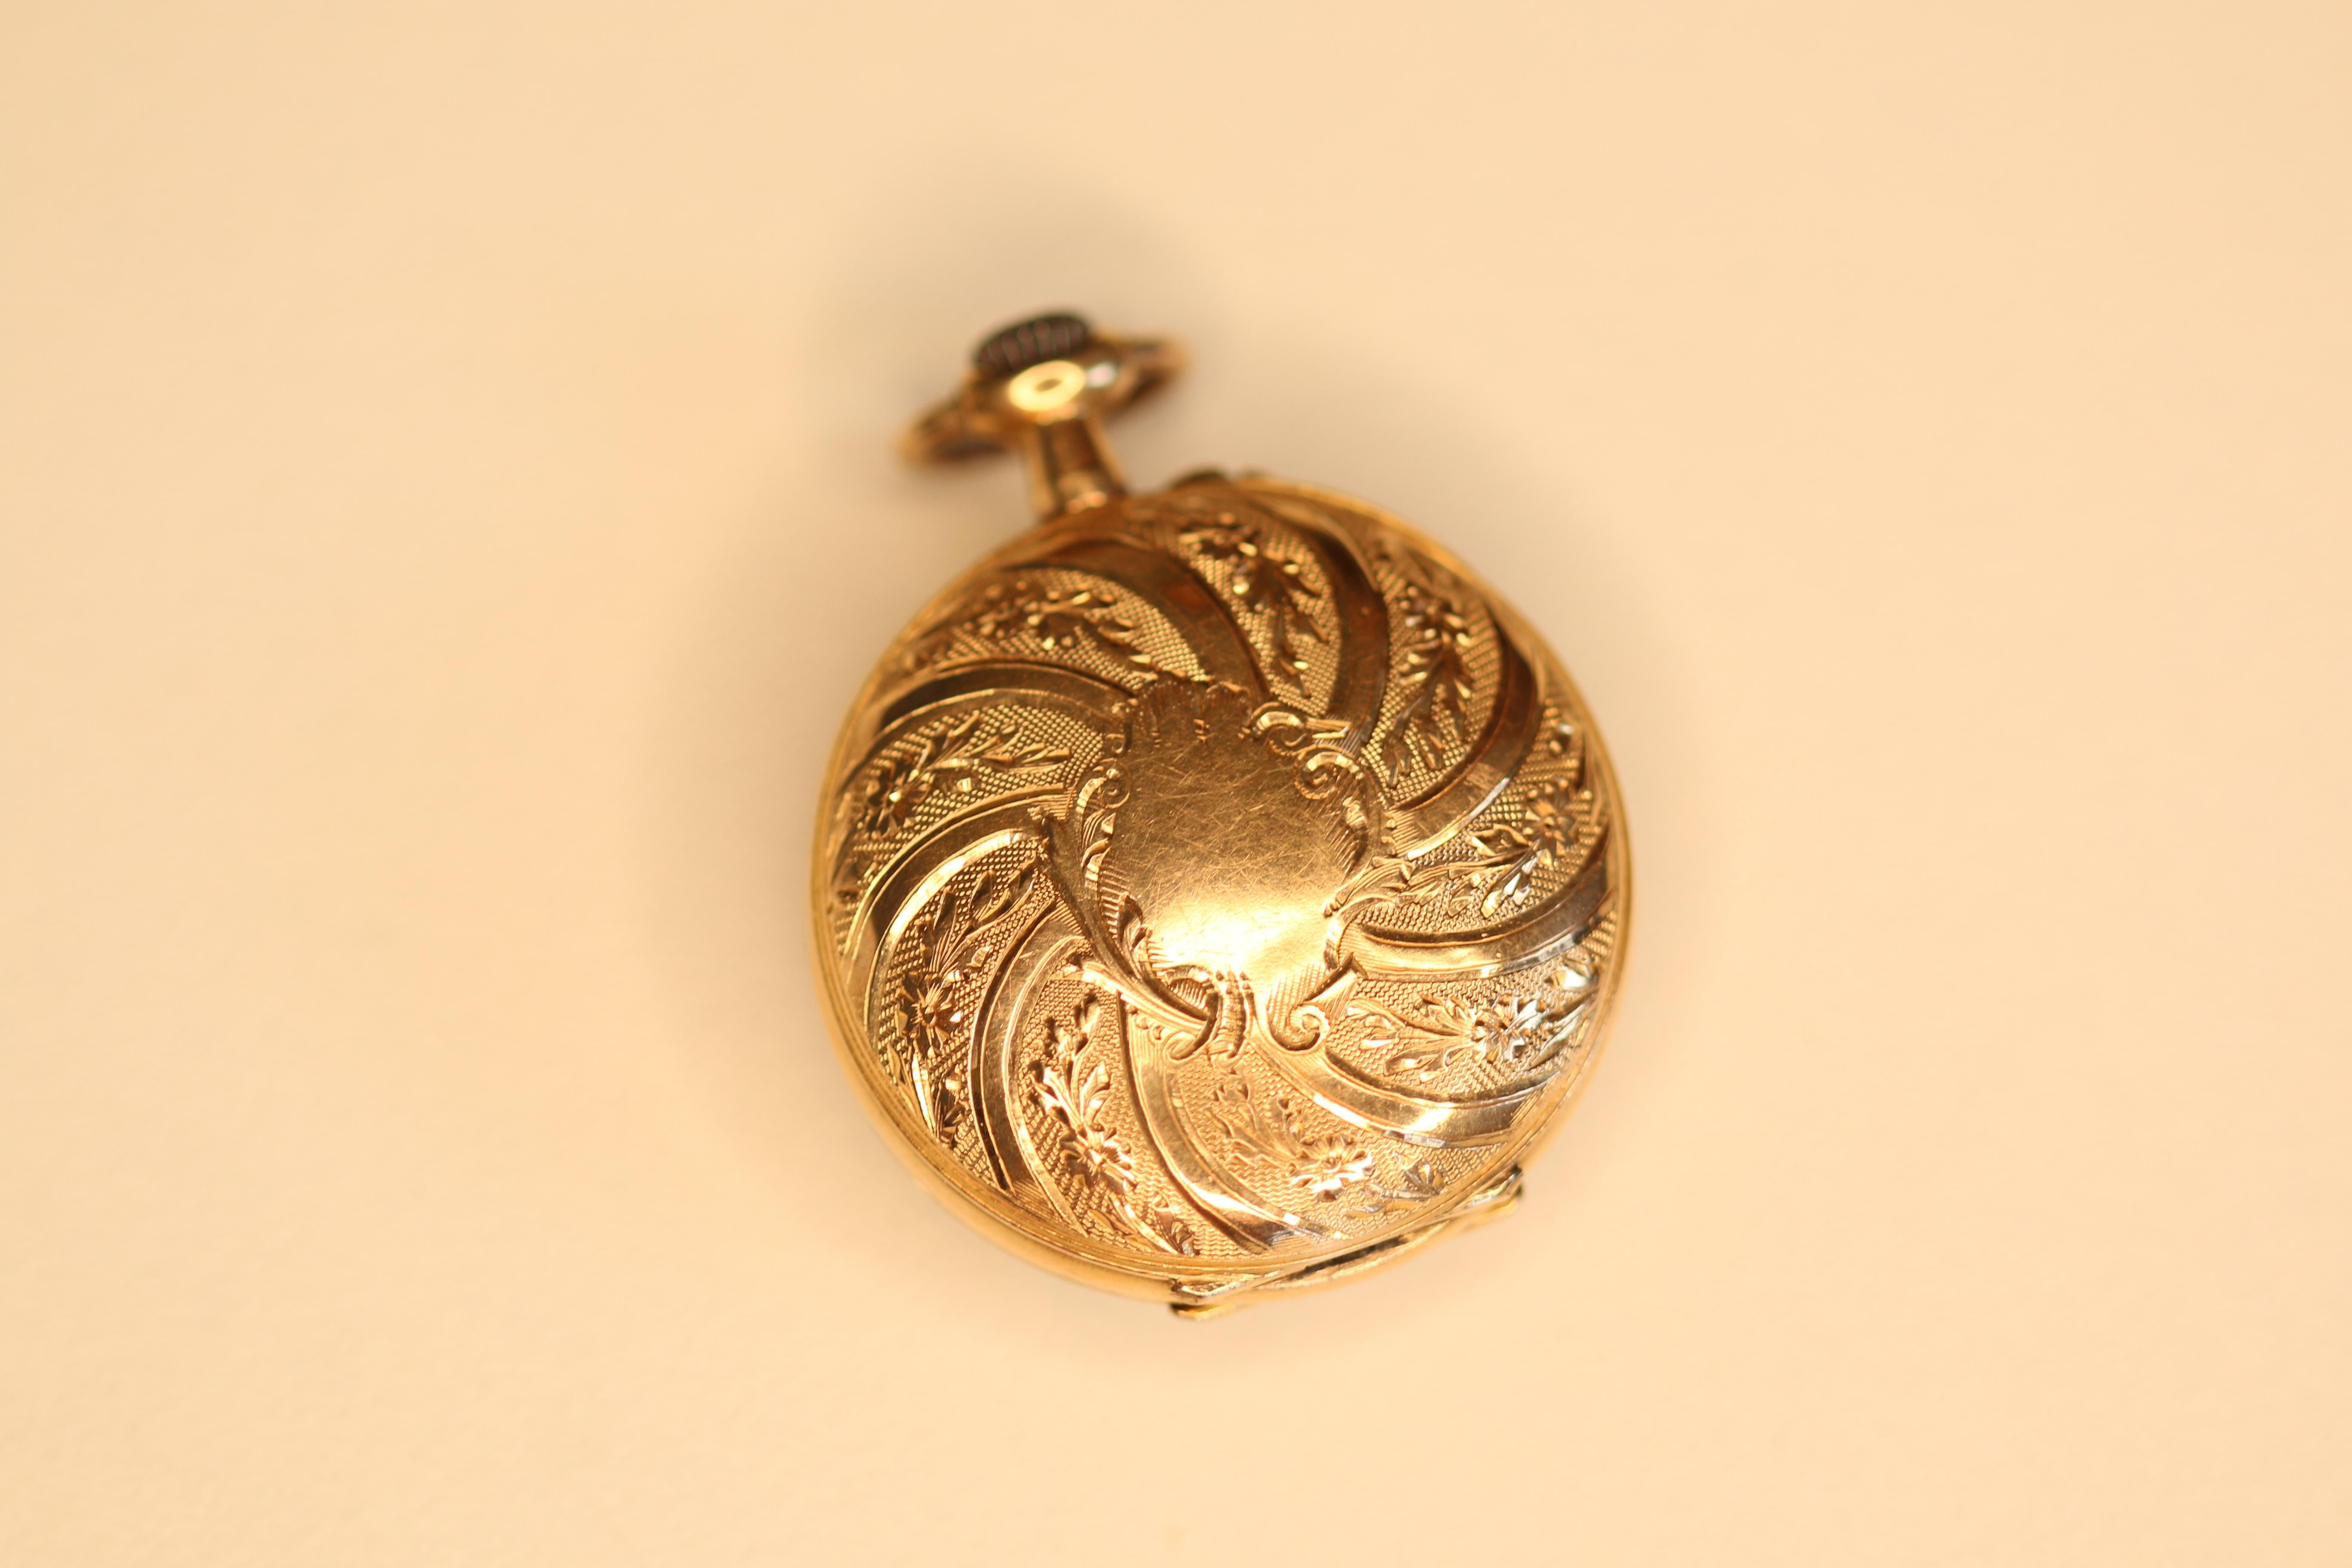 Victorian solid 14 kt gold ladies pocket watch . this watch has a 15 jewel mechanical hand winding movement that is in good working condition. This watch has a beautiful porcelain dial. All covers are stamped 14k the dust cover is engraved with